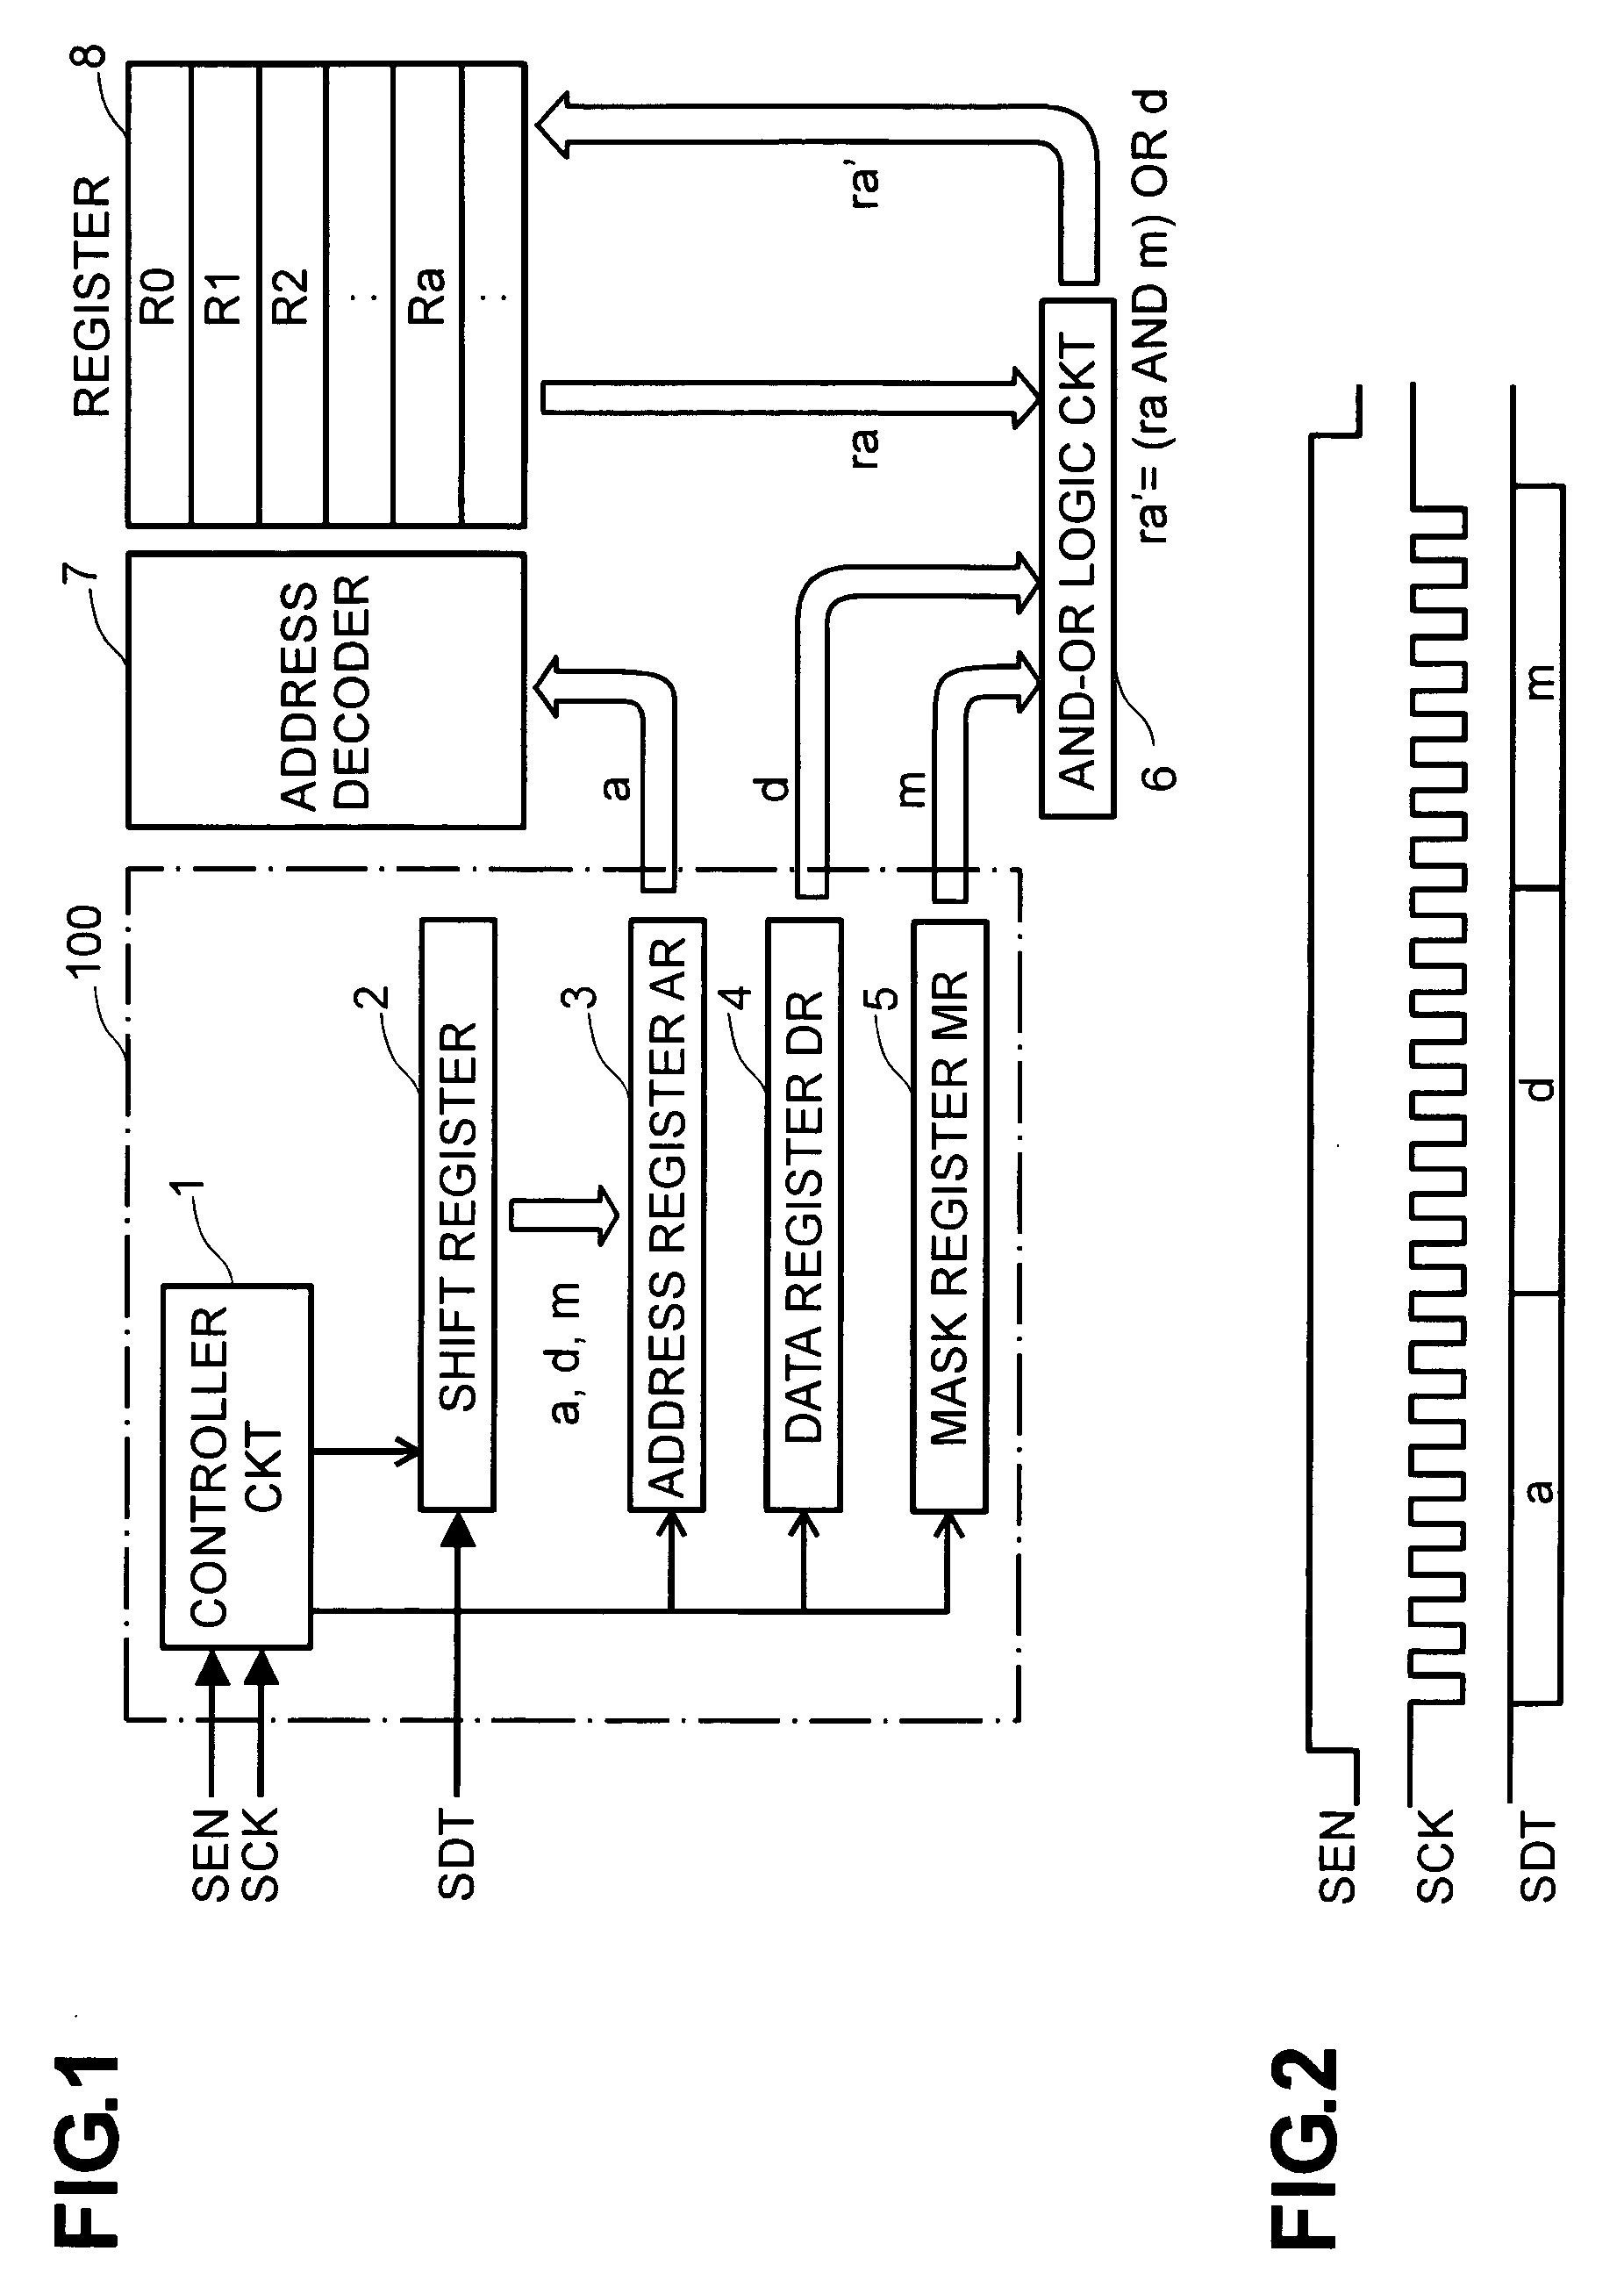 Analog signal processor, as well as, a data register rewriting method and a data transmission method thereof